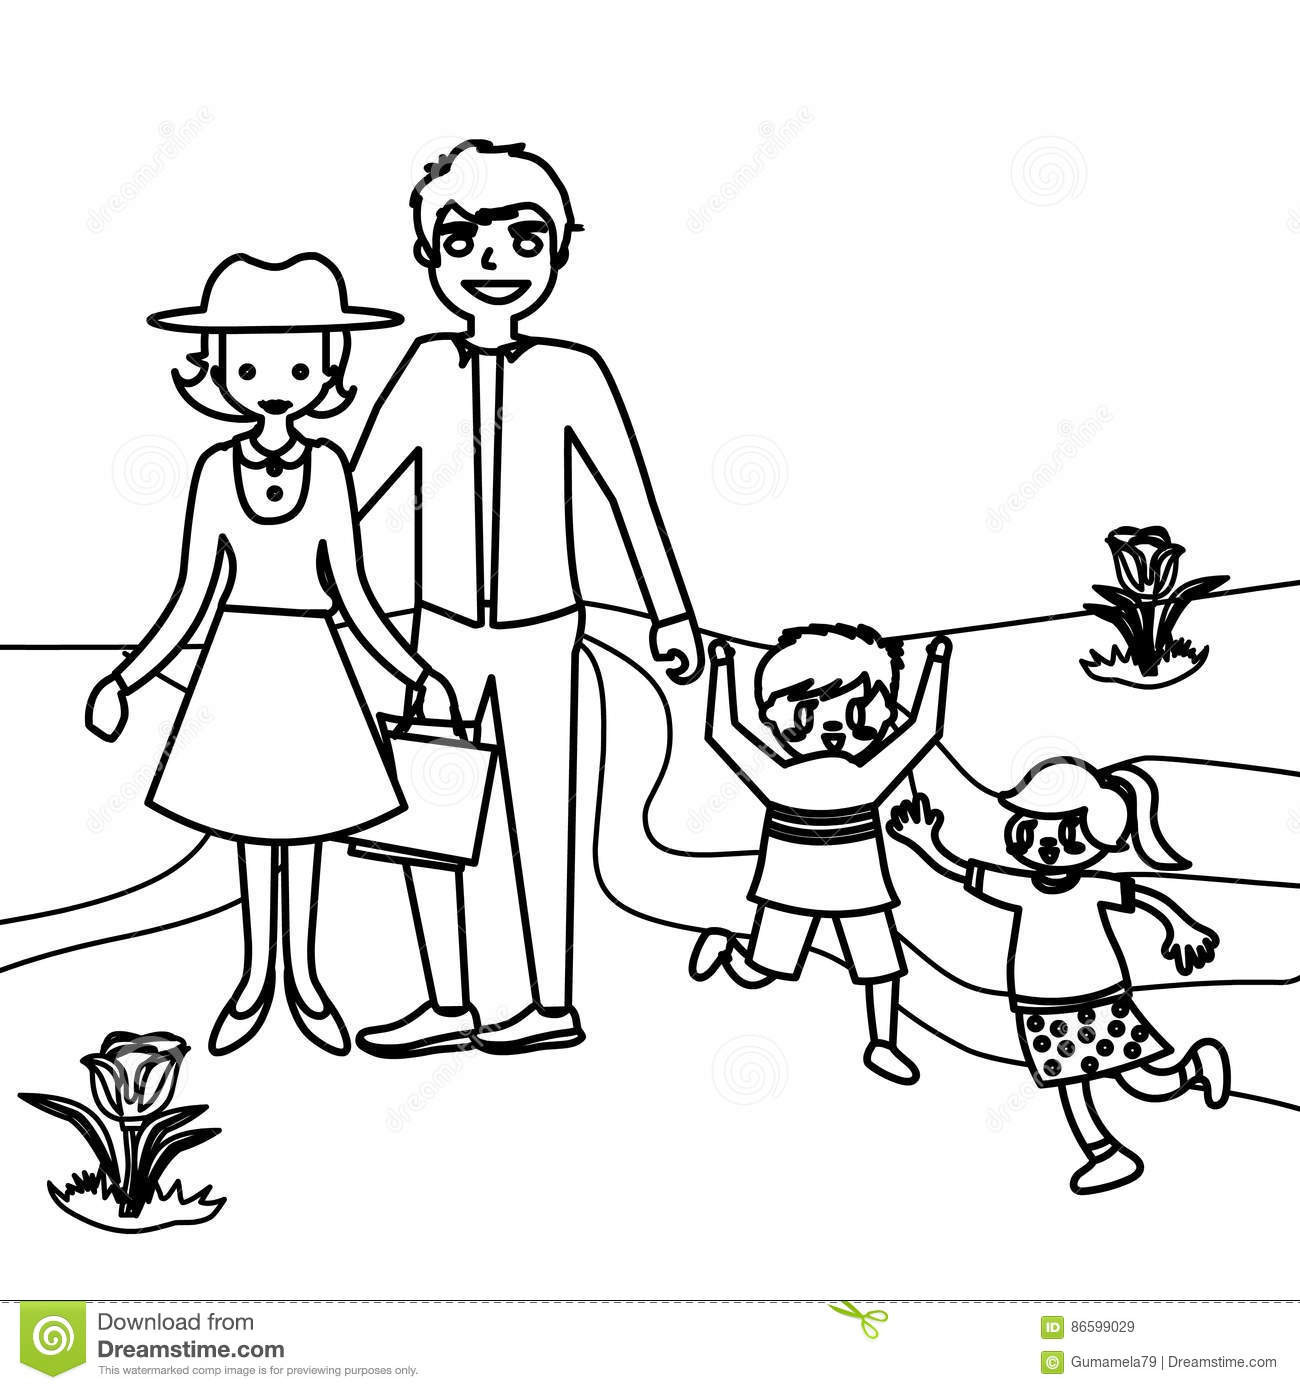 Family Coloring Pages For Kids
 Happy family coloring page stock illustration